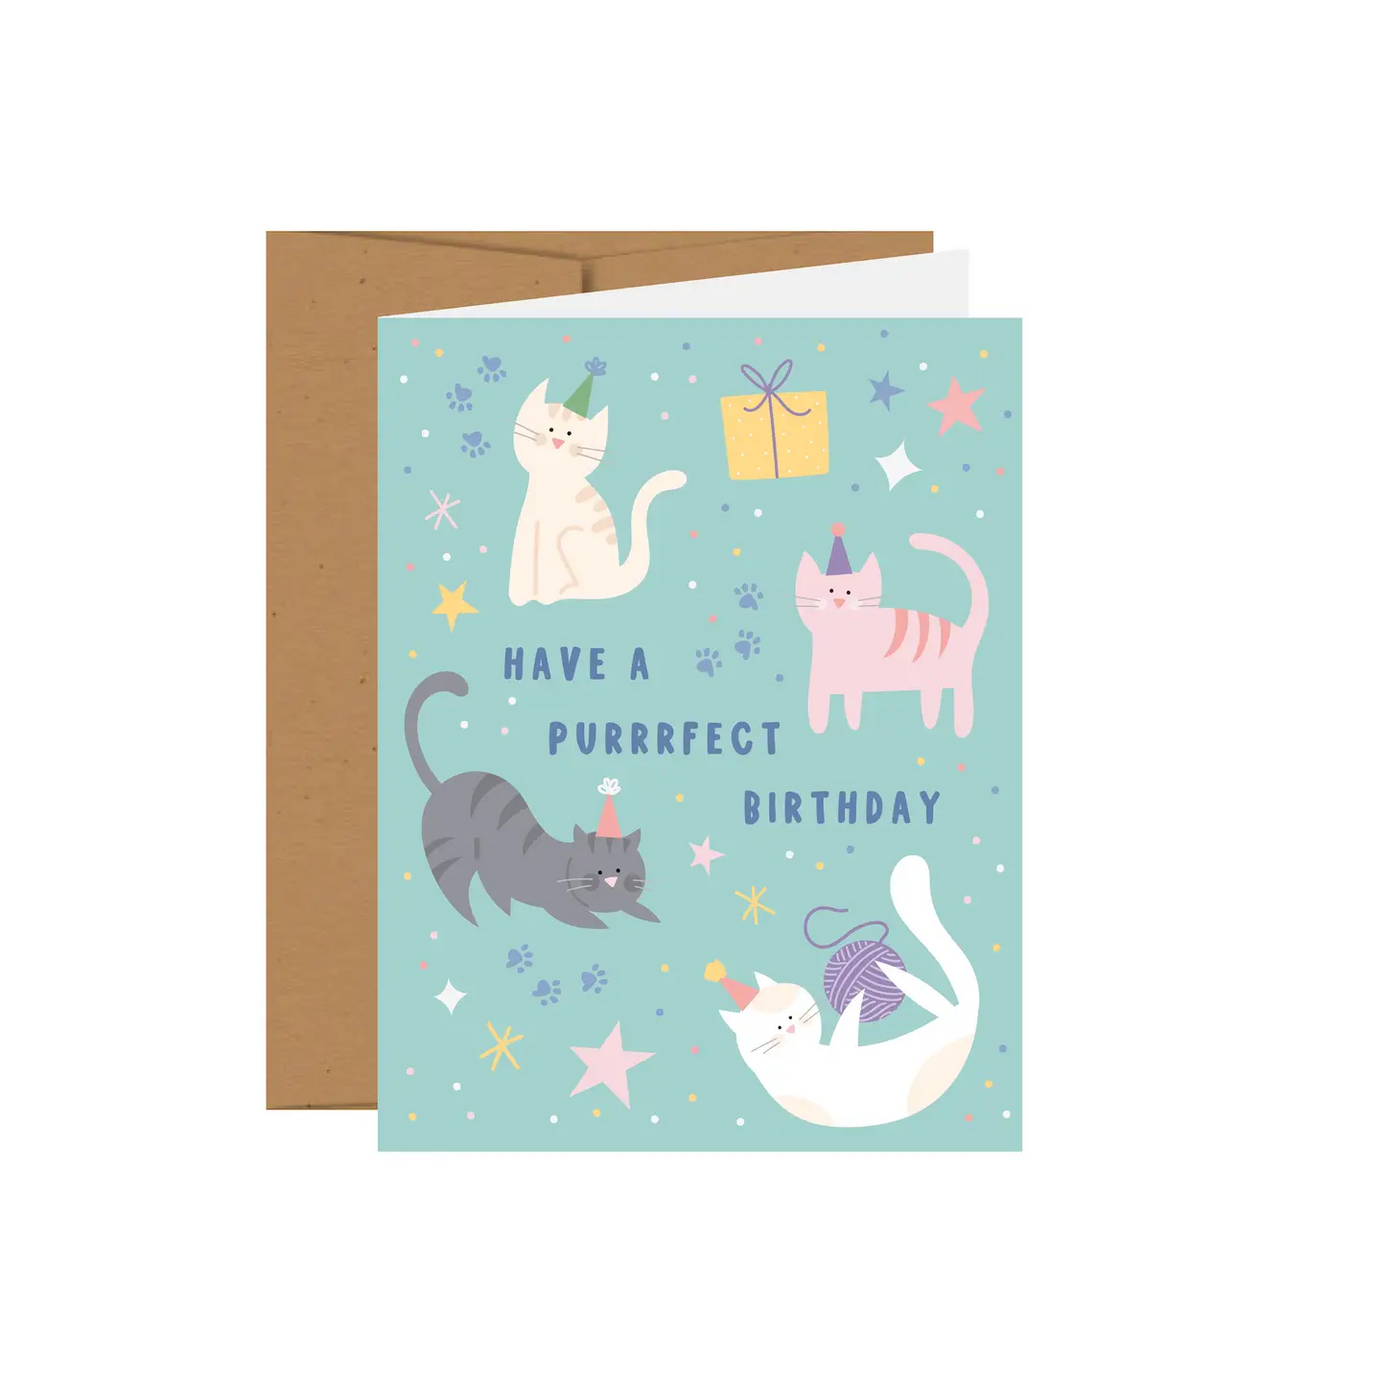 Have A Purrrfect Birthday Greeting Card-Greeting Card-Pippi Post-Stella Violet Boutique in Arvada, Colorado